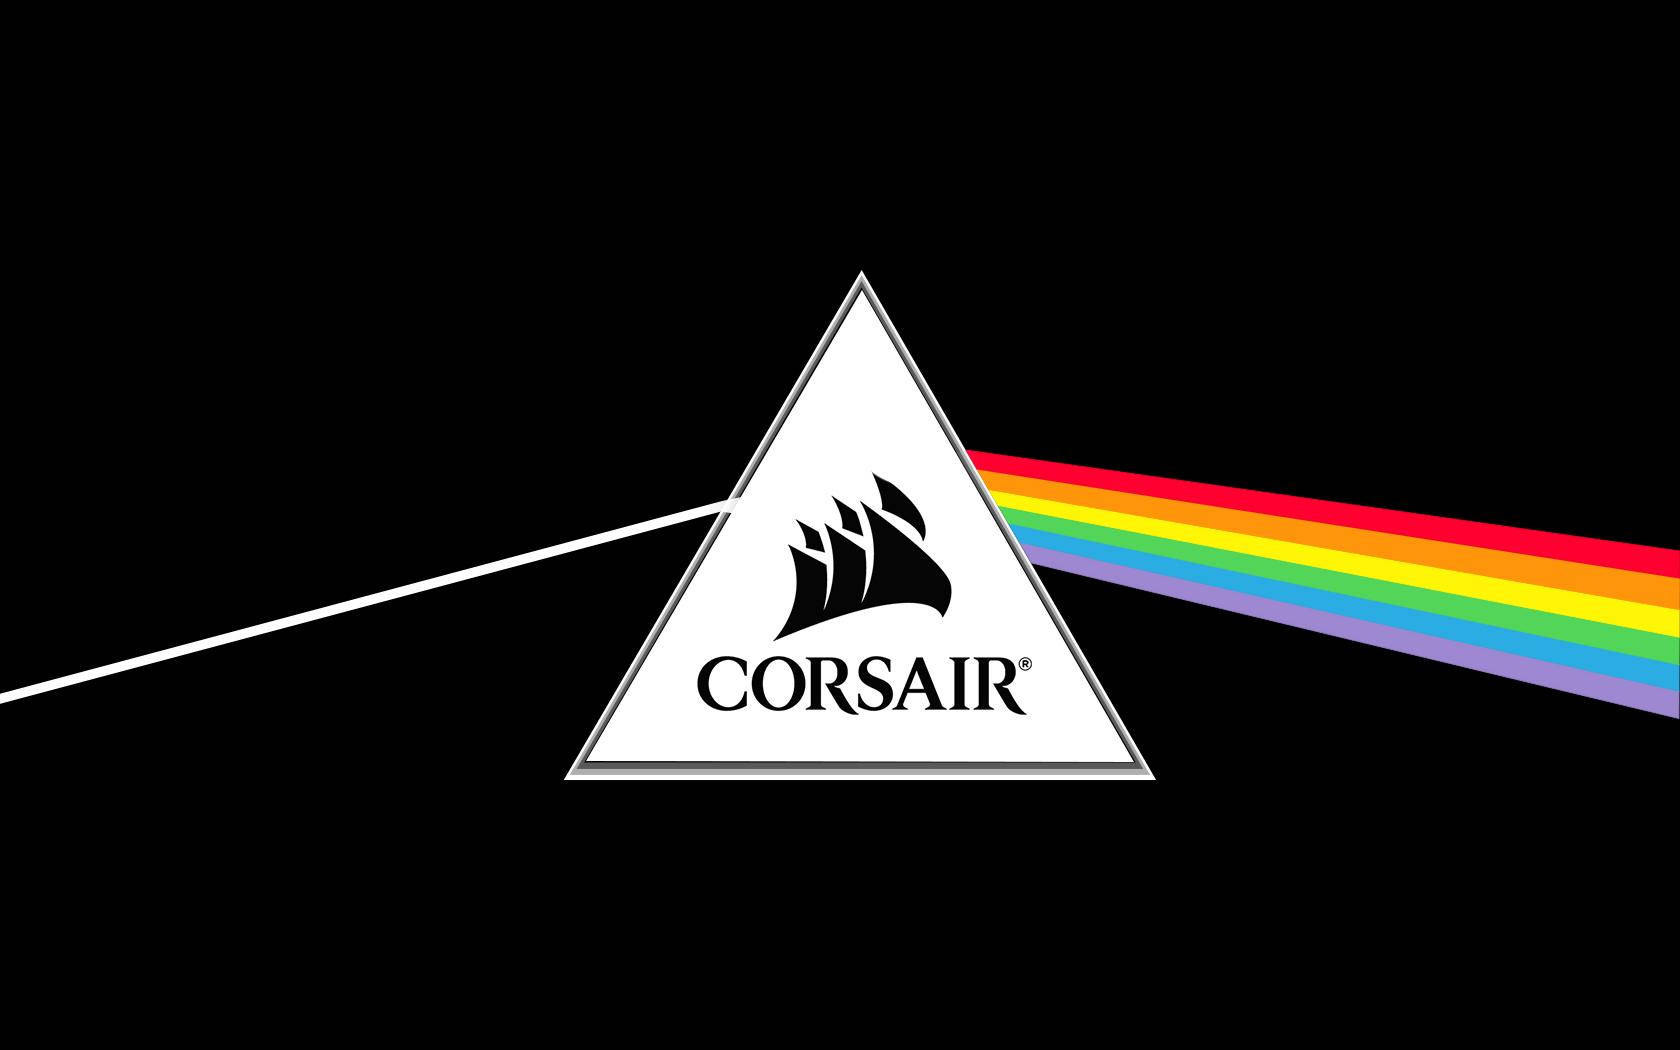 Add a Vibrant Pop of Color to Your World with Corsair's Triangle Rainbow Prism Wallpaper